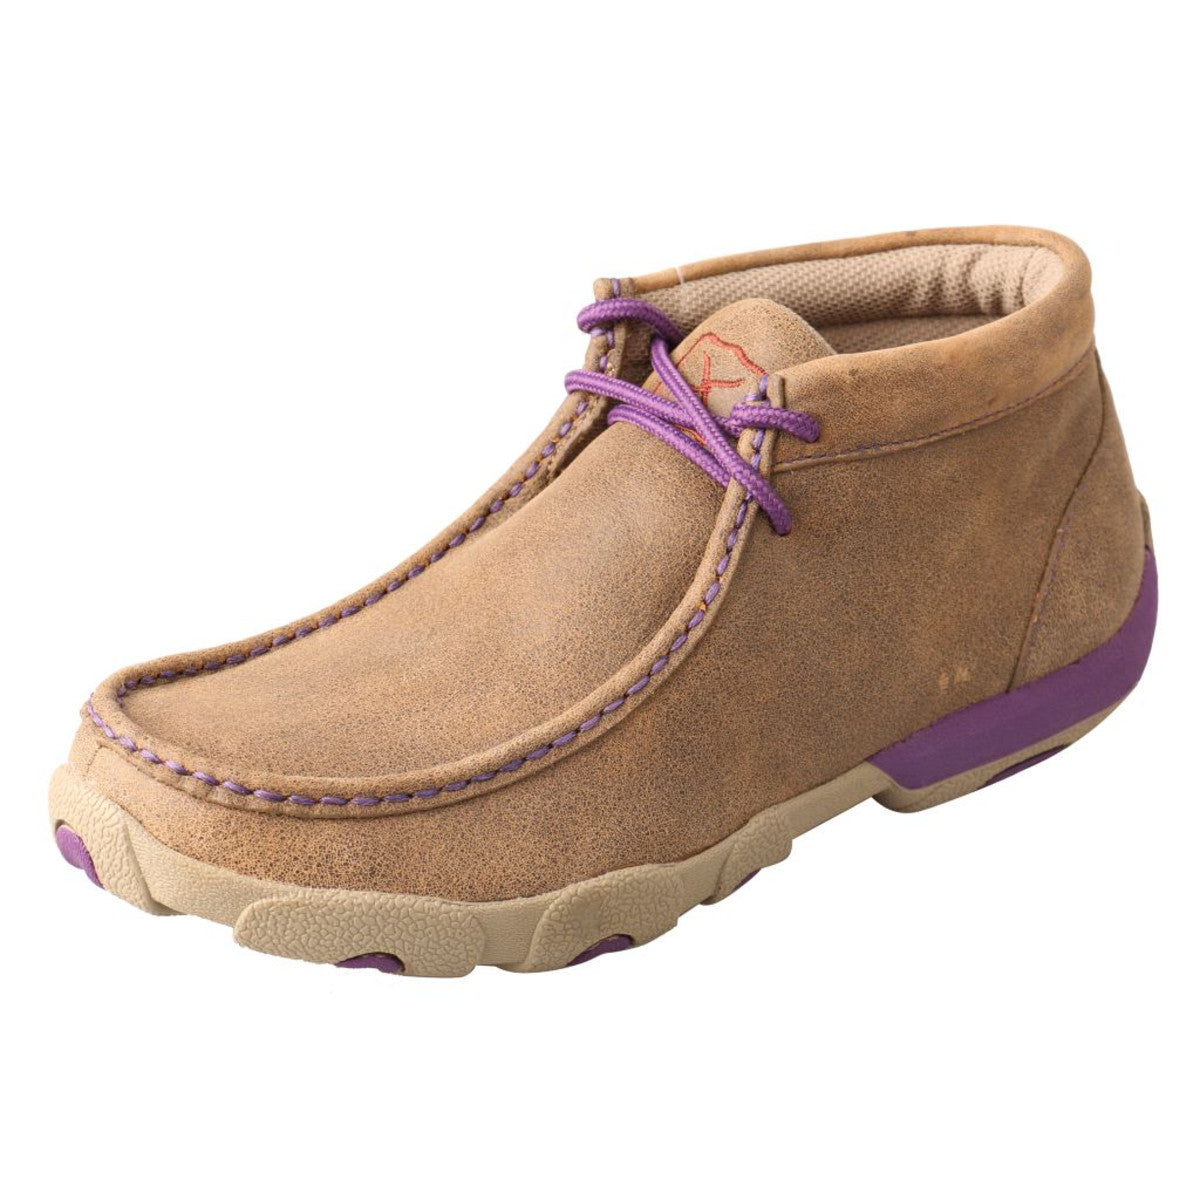 Women's Twisted X Chukka Driving Moccasins Shoe in Bomber & Purple from the front